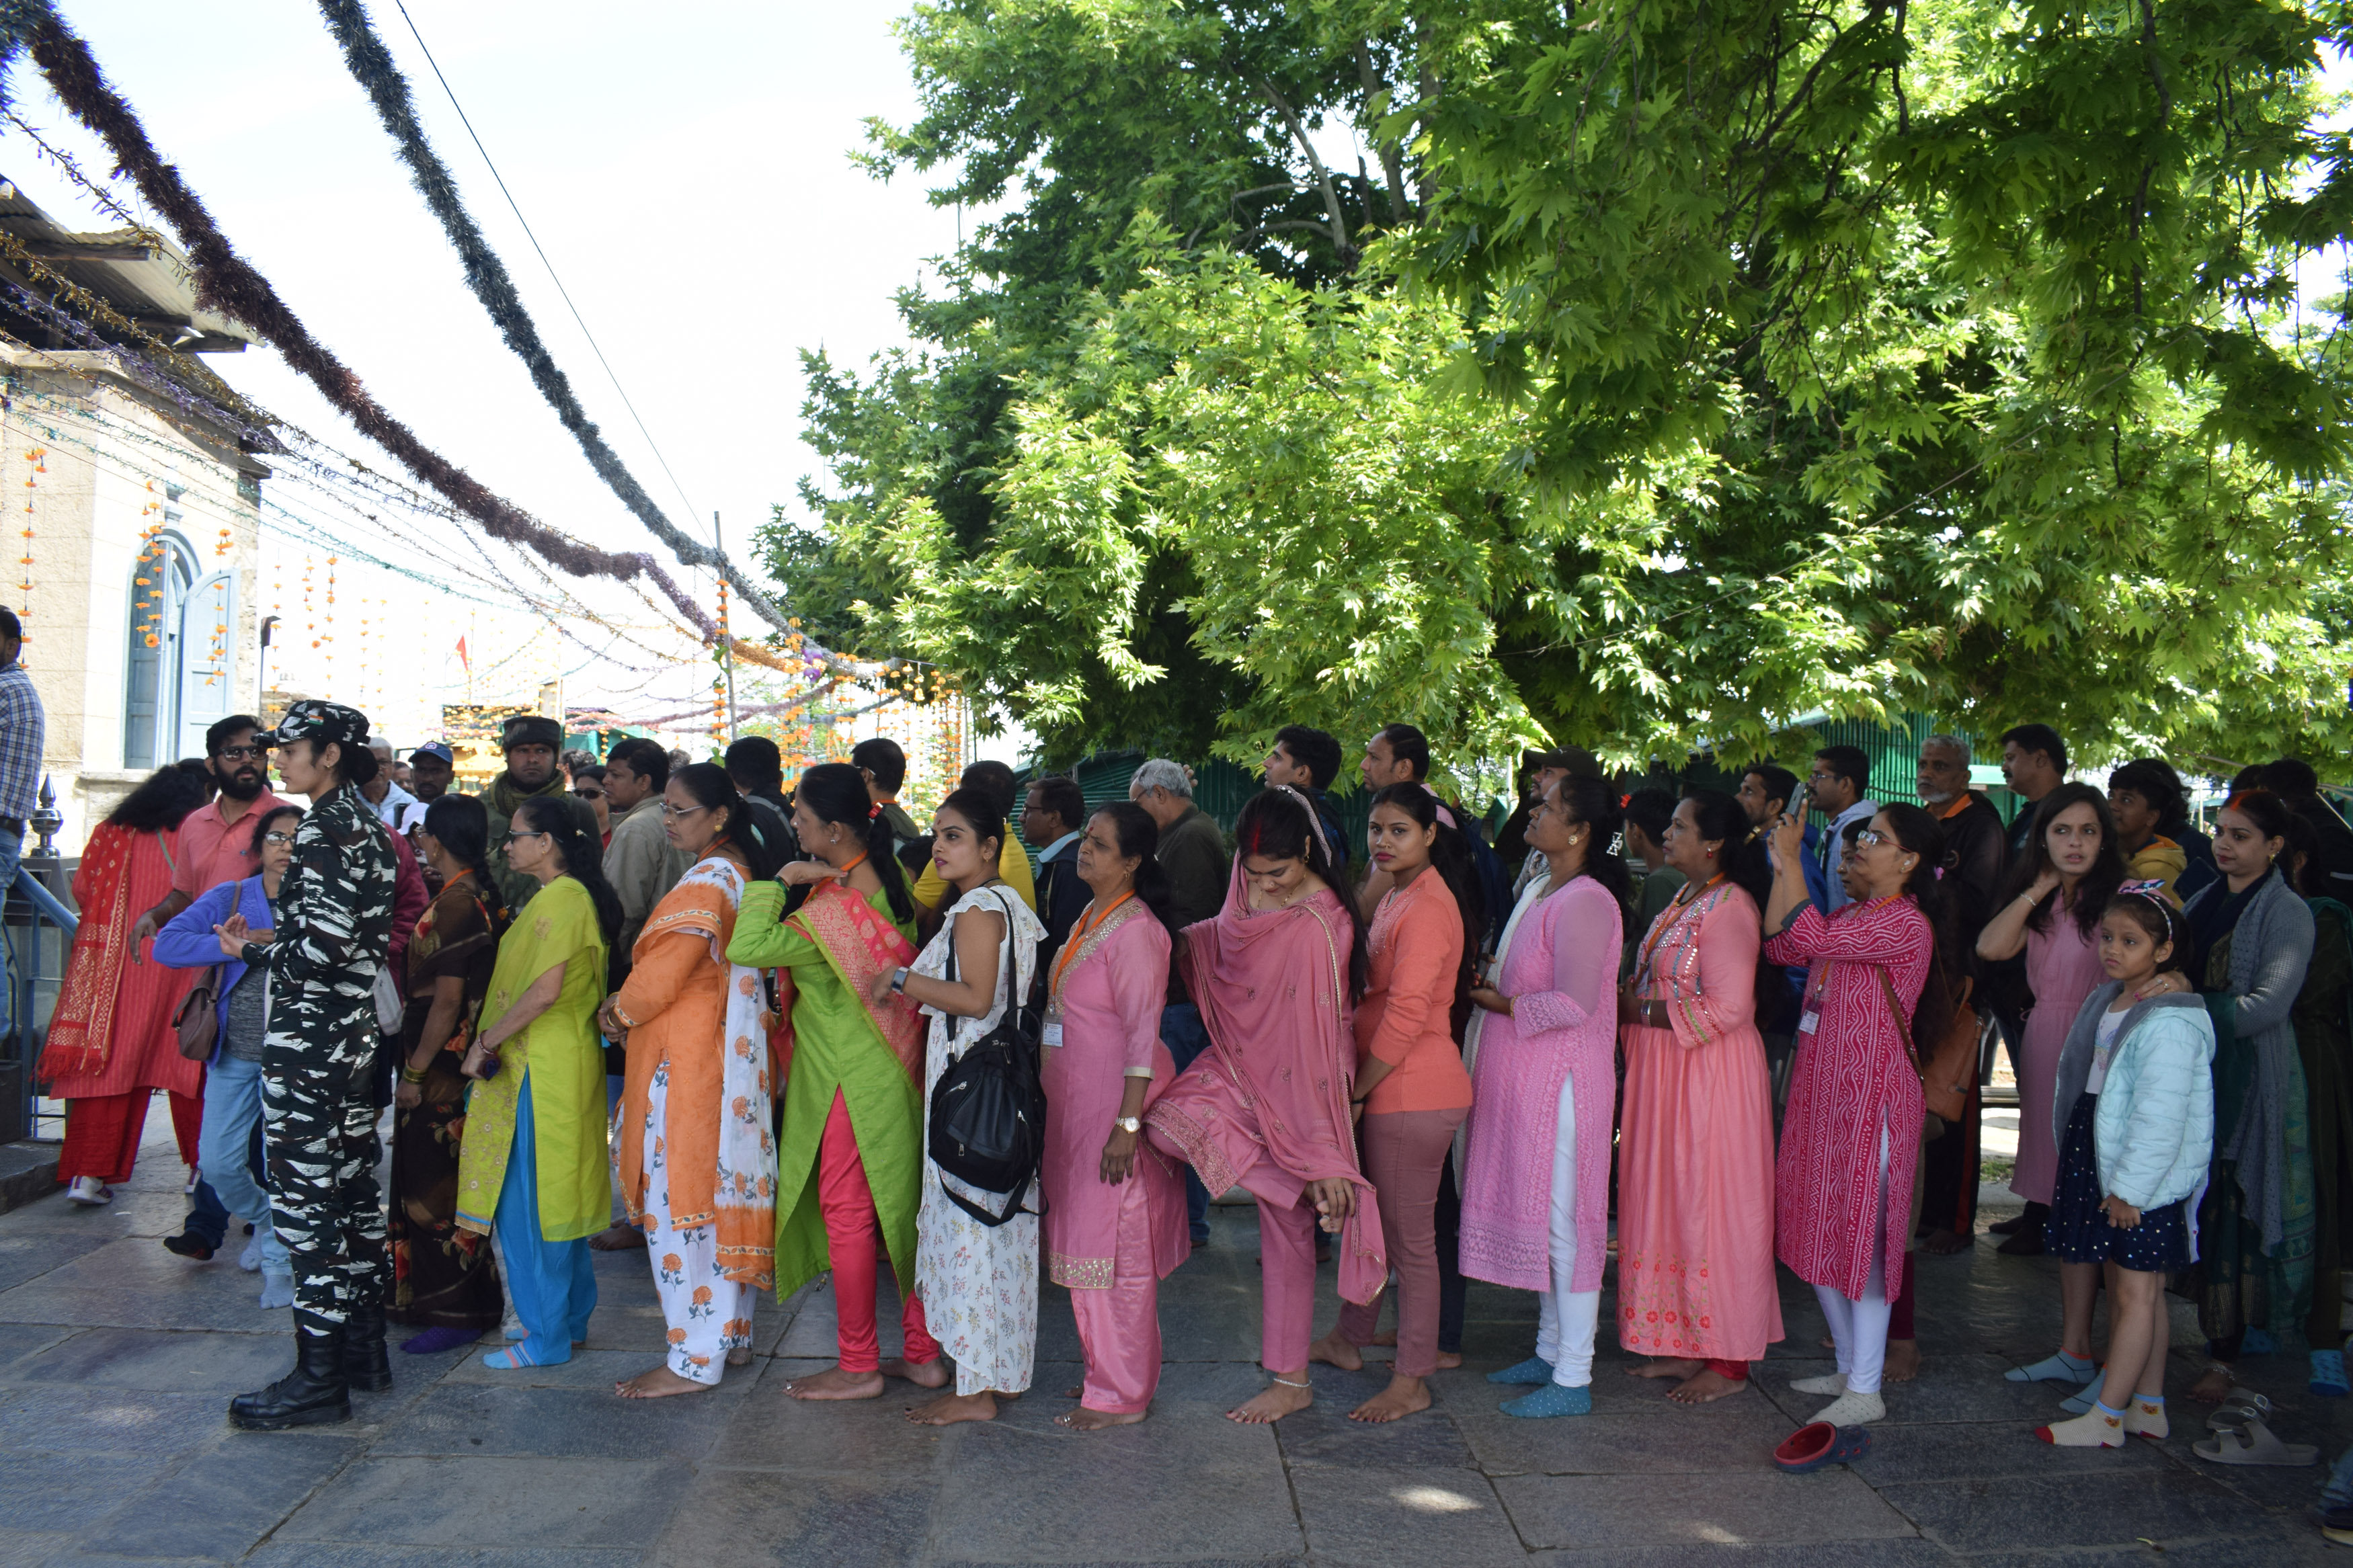 Every year people from throughout the country visit Srinagar on Shankrajayanti